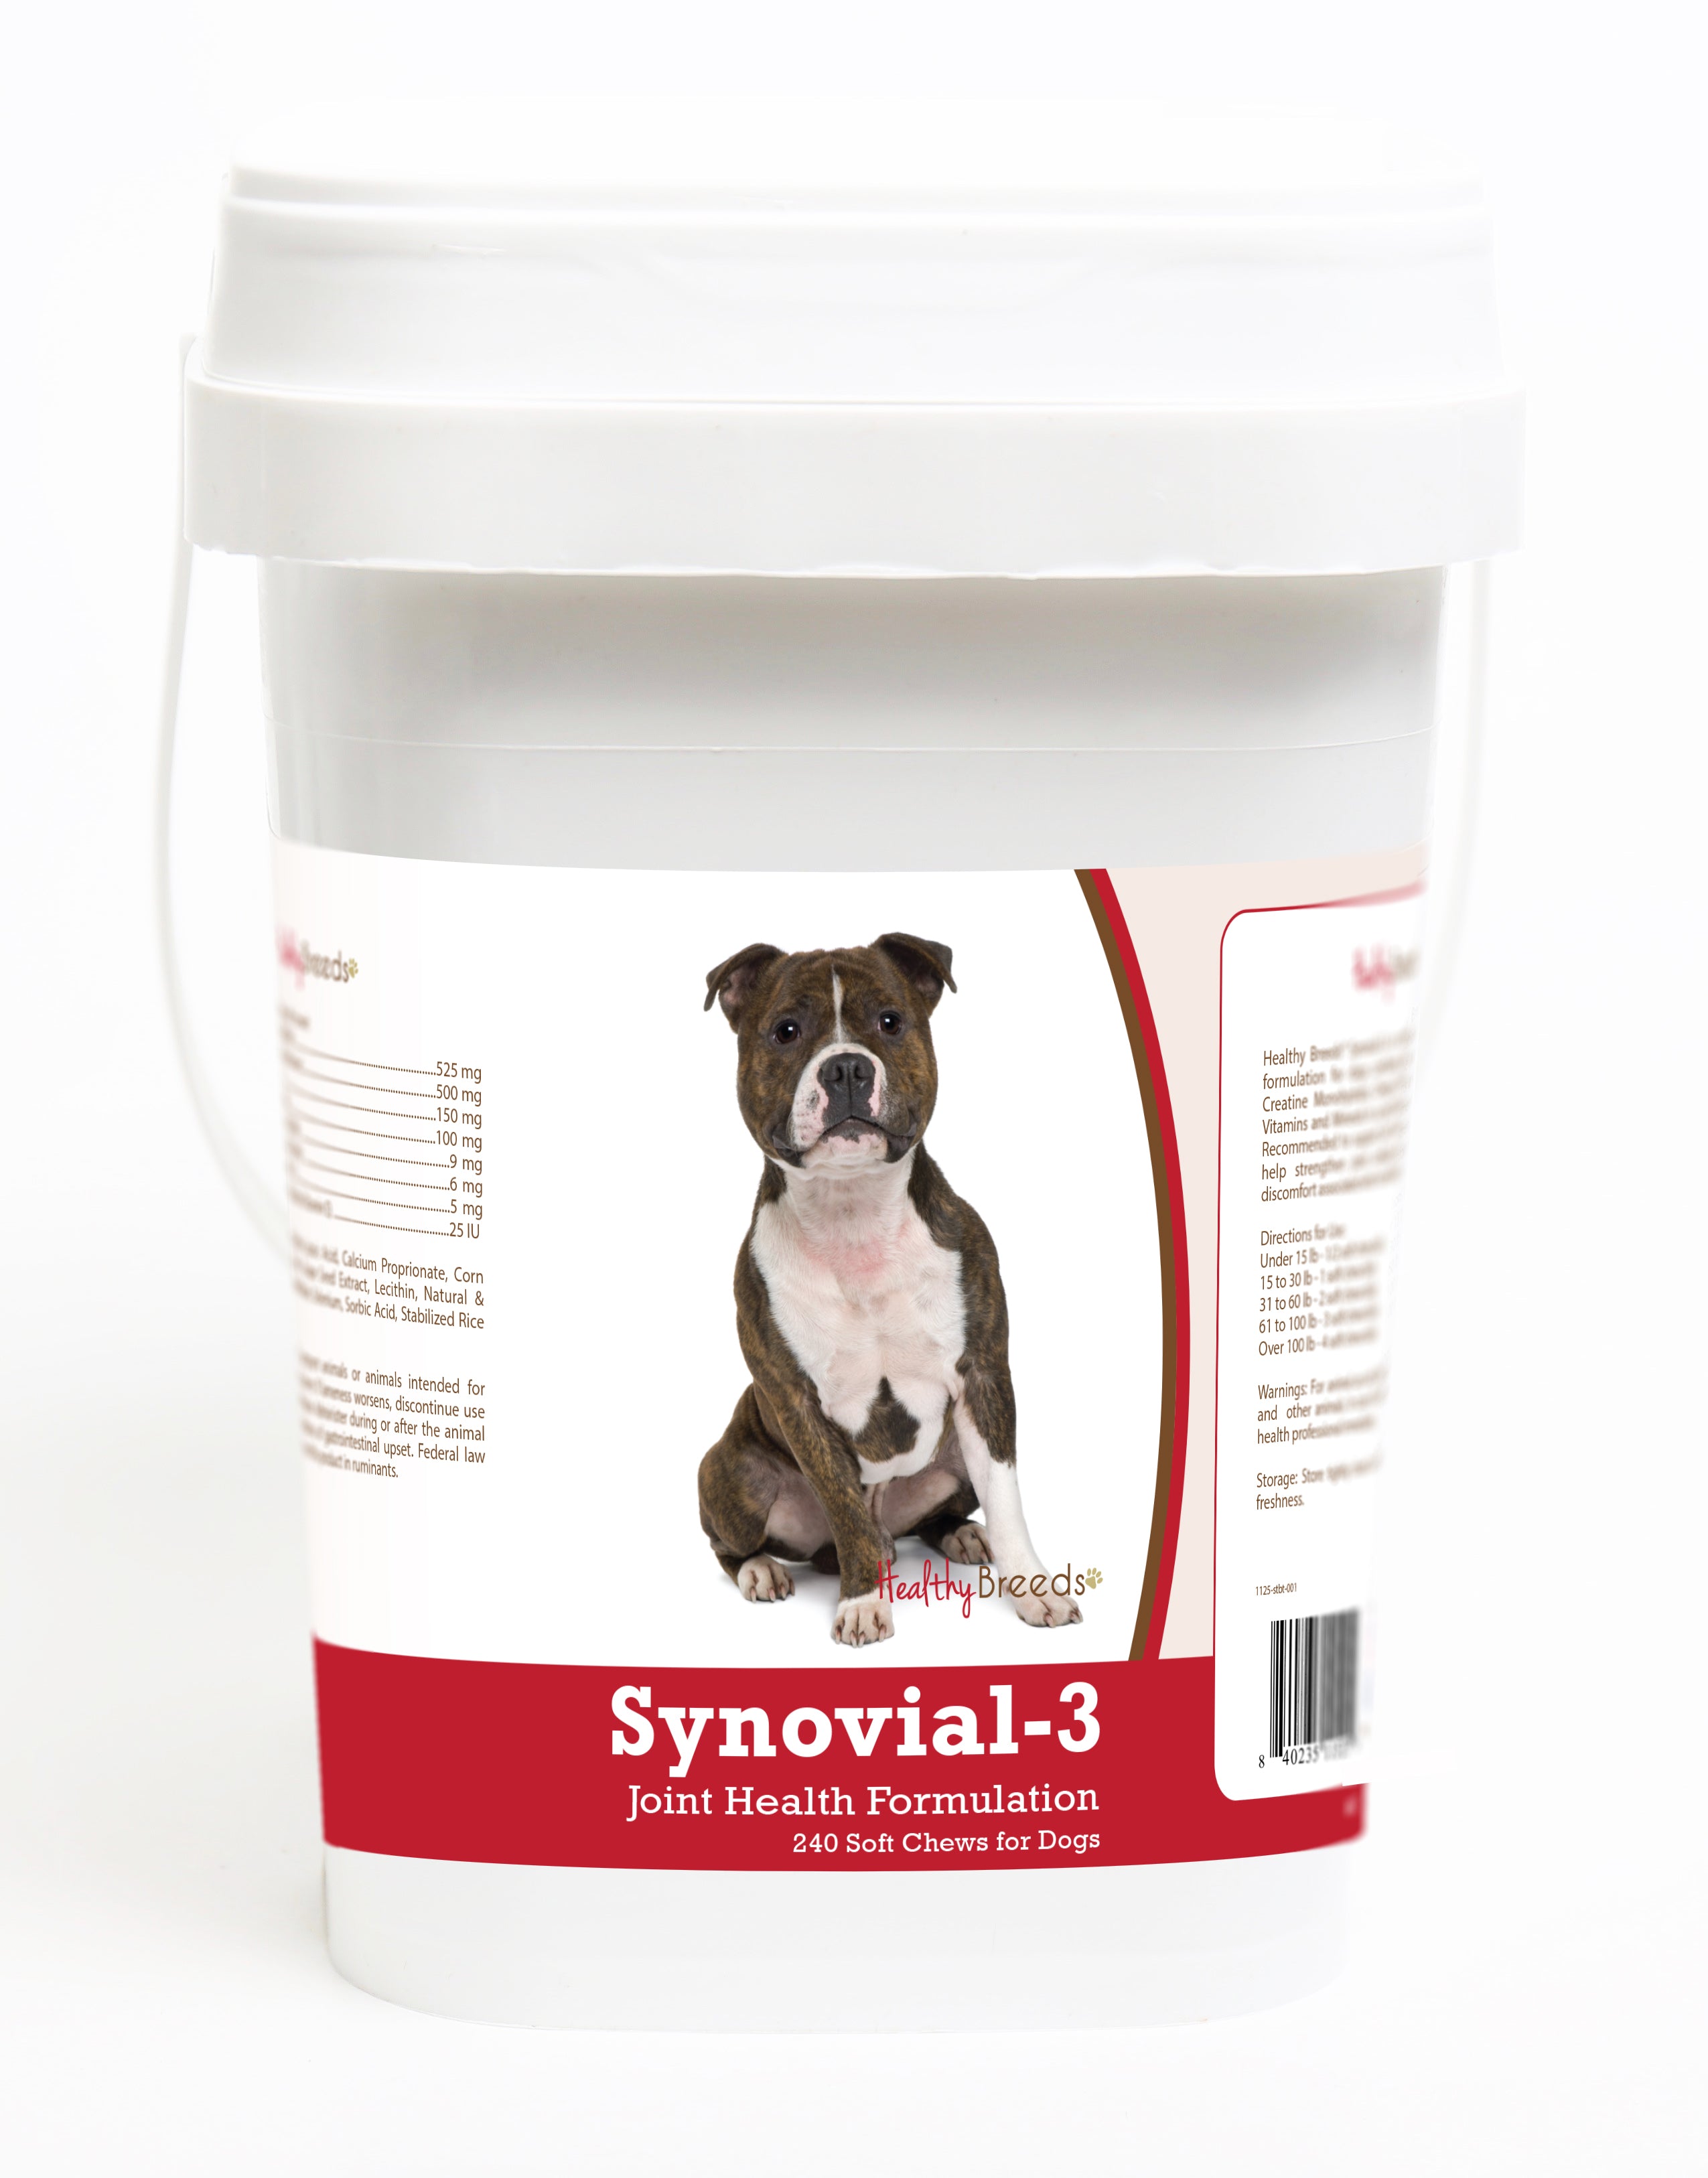 Staffordshire Bull Terrier Synovial-3 Joint Health Formulation Soft Chews 240 Count